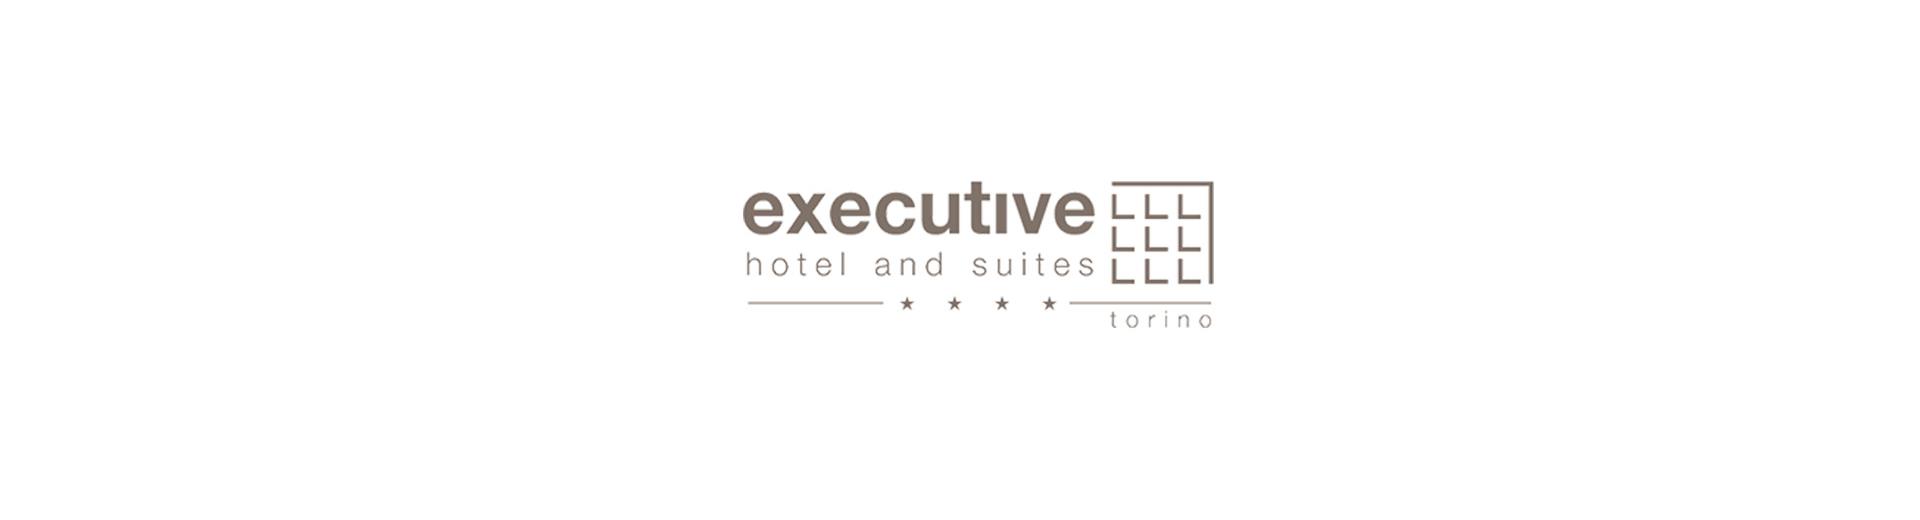 BW Plus Executive Hotel and Suites Torino